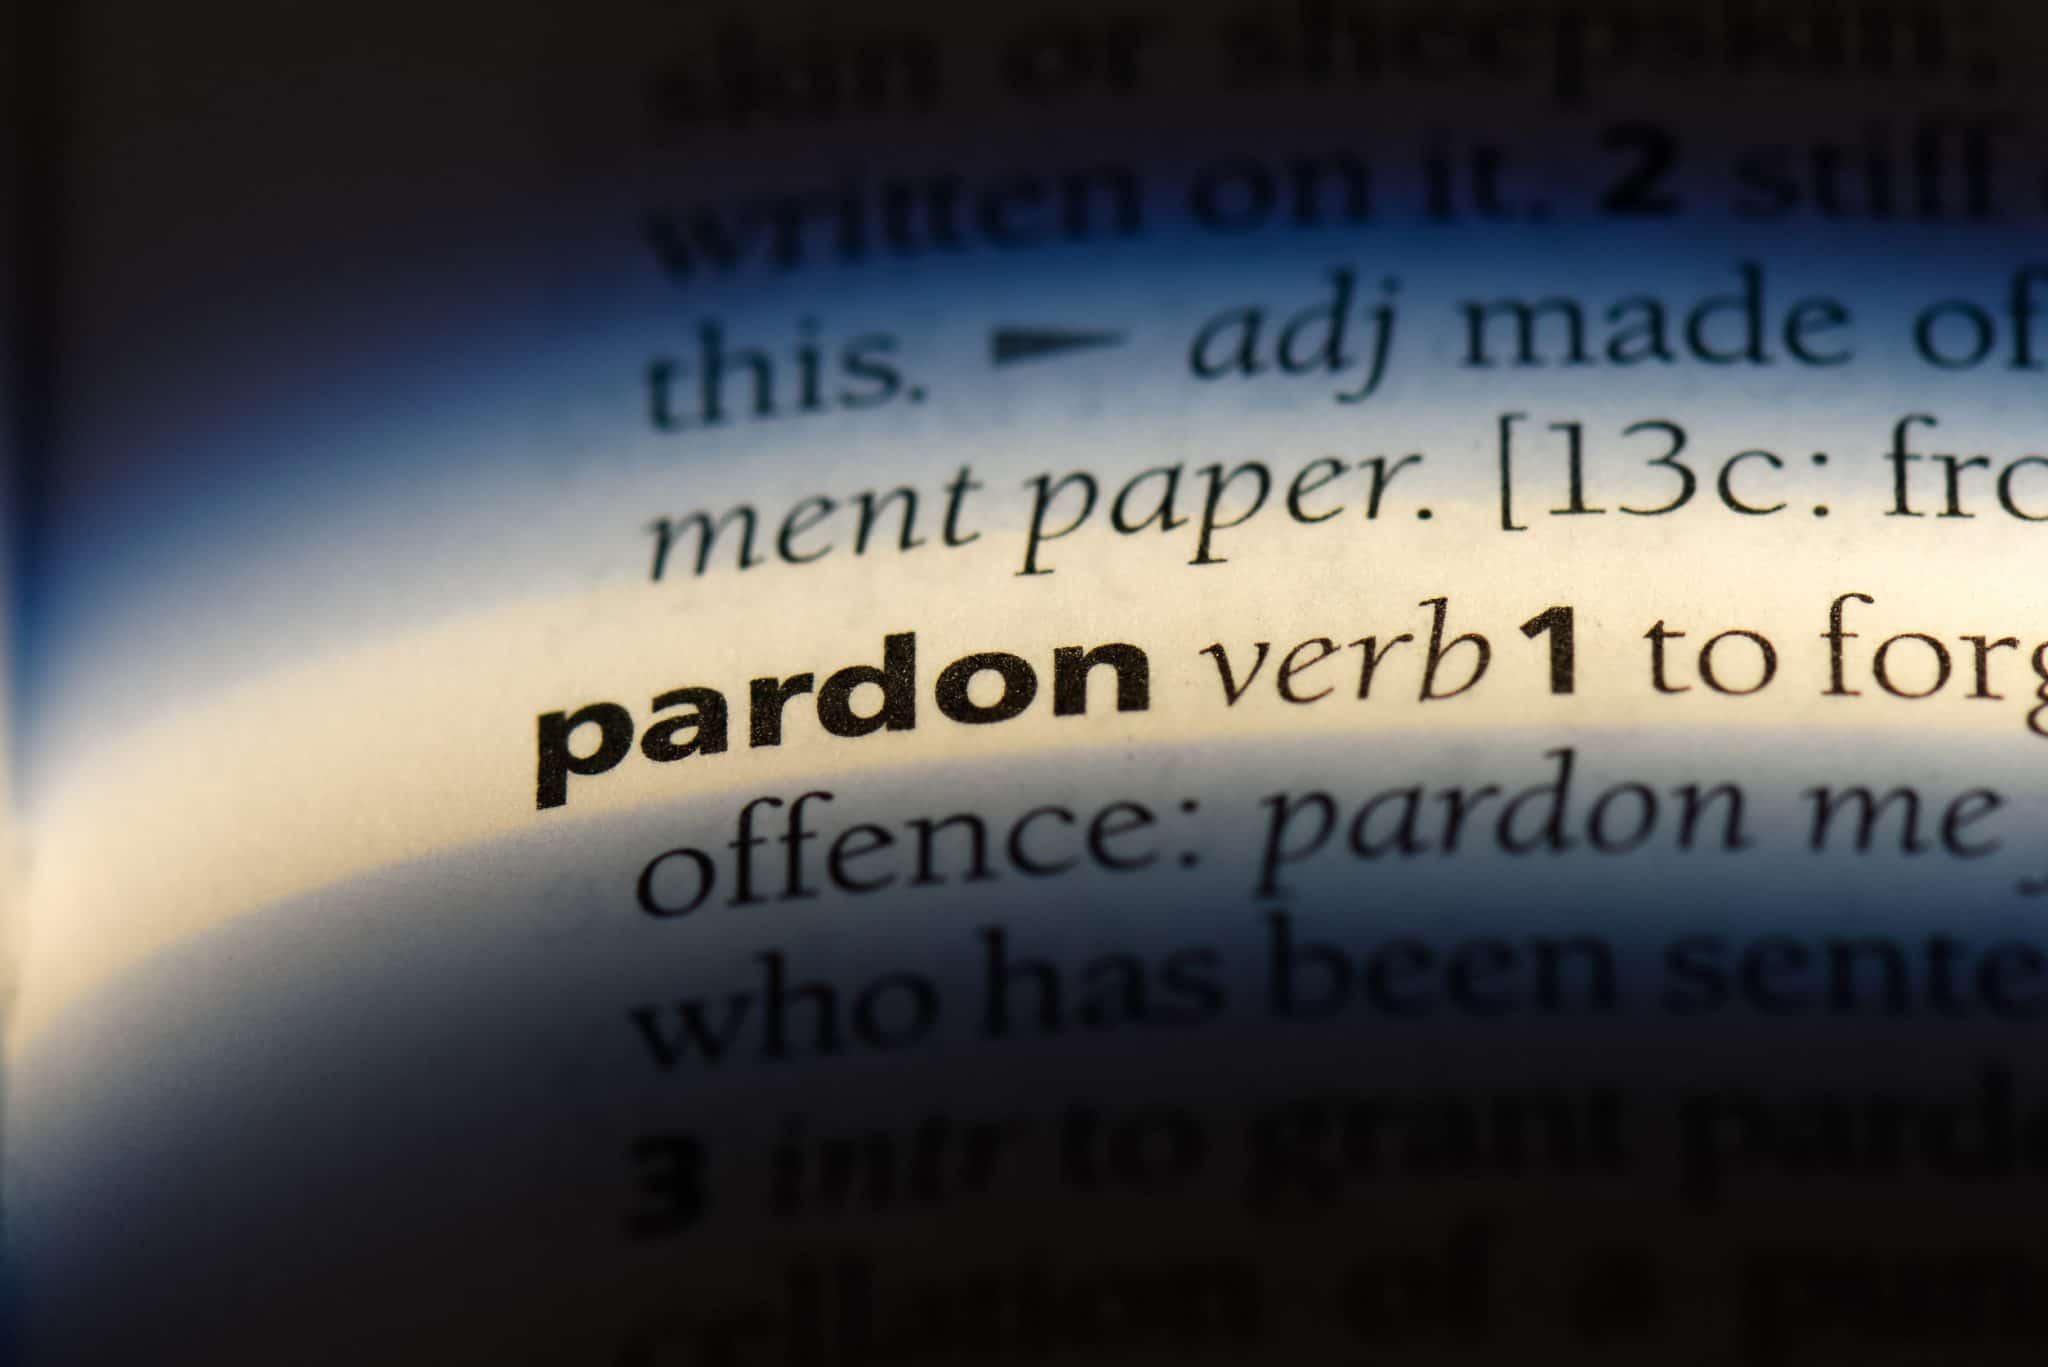 What Makes Someone Eligible For a Pardon in Minnesota?